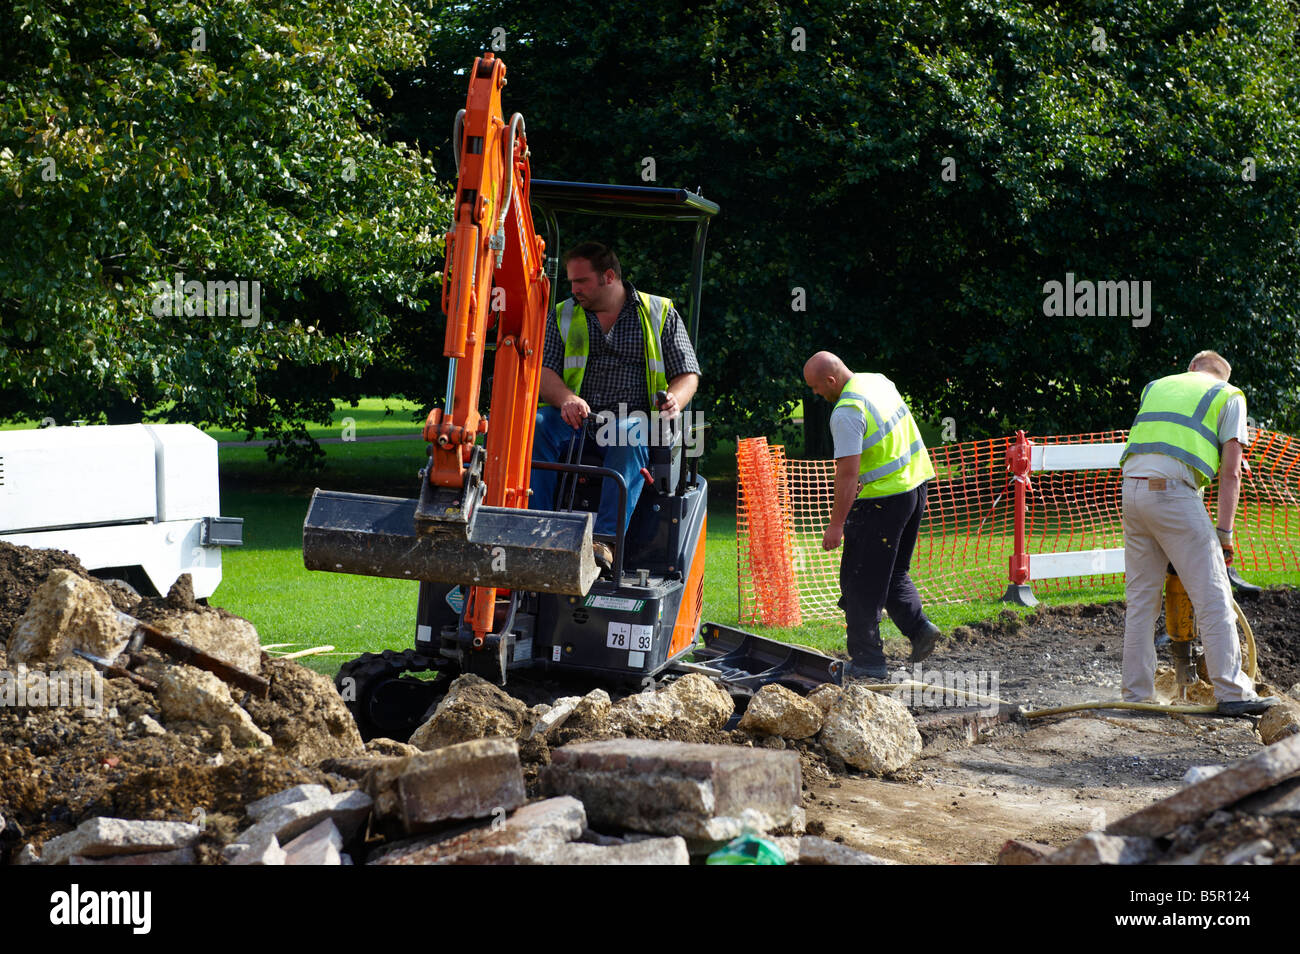 Workers digging with digger machinery Cambridge UK Stock Photo